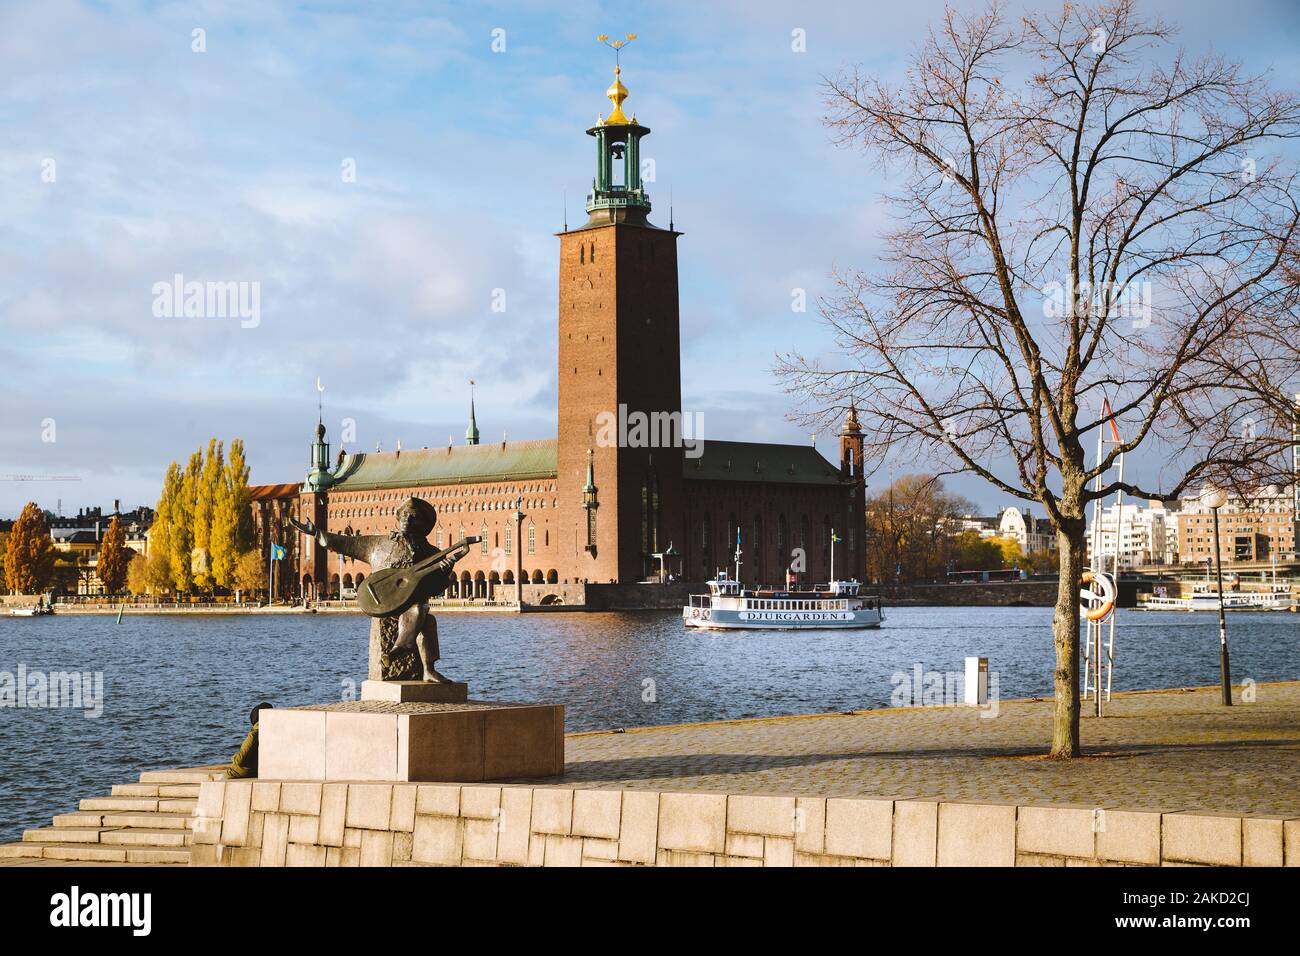 Scenic view of famous Stockholm city hall with Djurgarden ferry boat and Evert Taube statue, central Stockholm, Sweden, Scandinavia Stock Photo